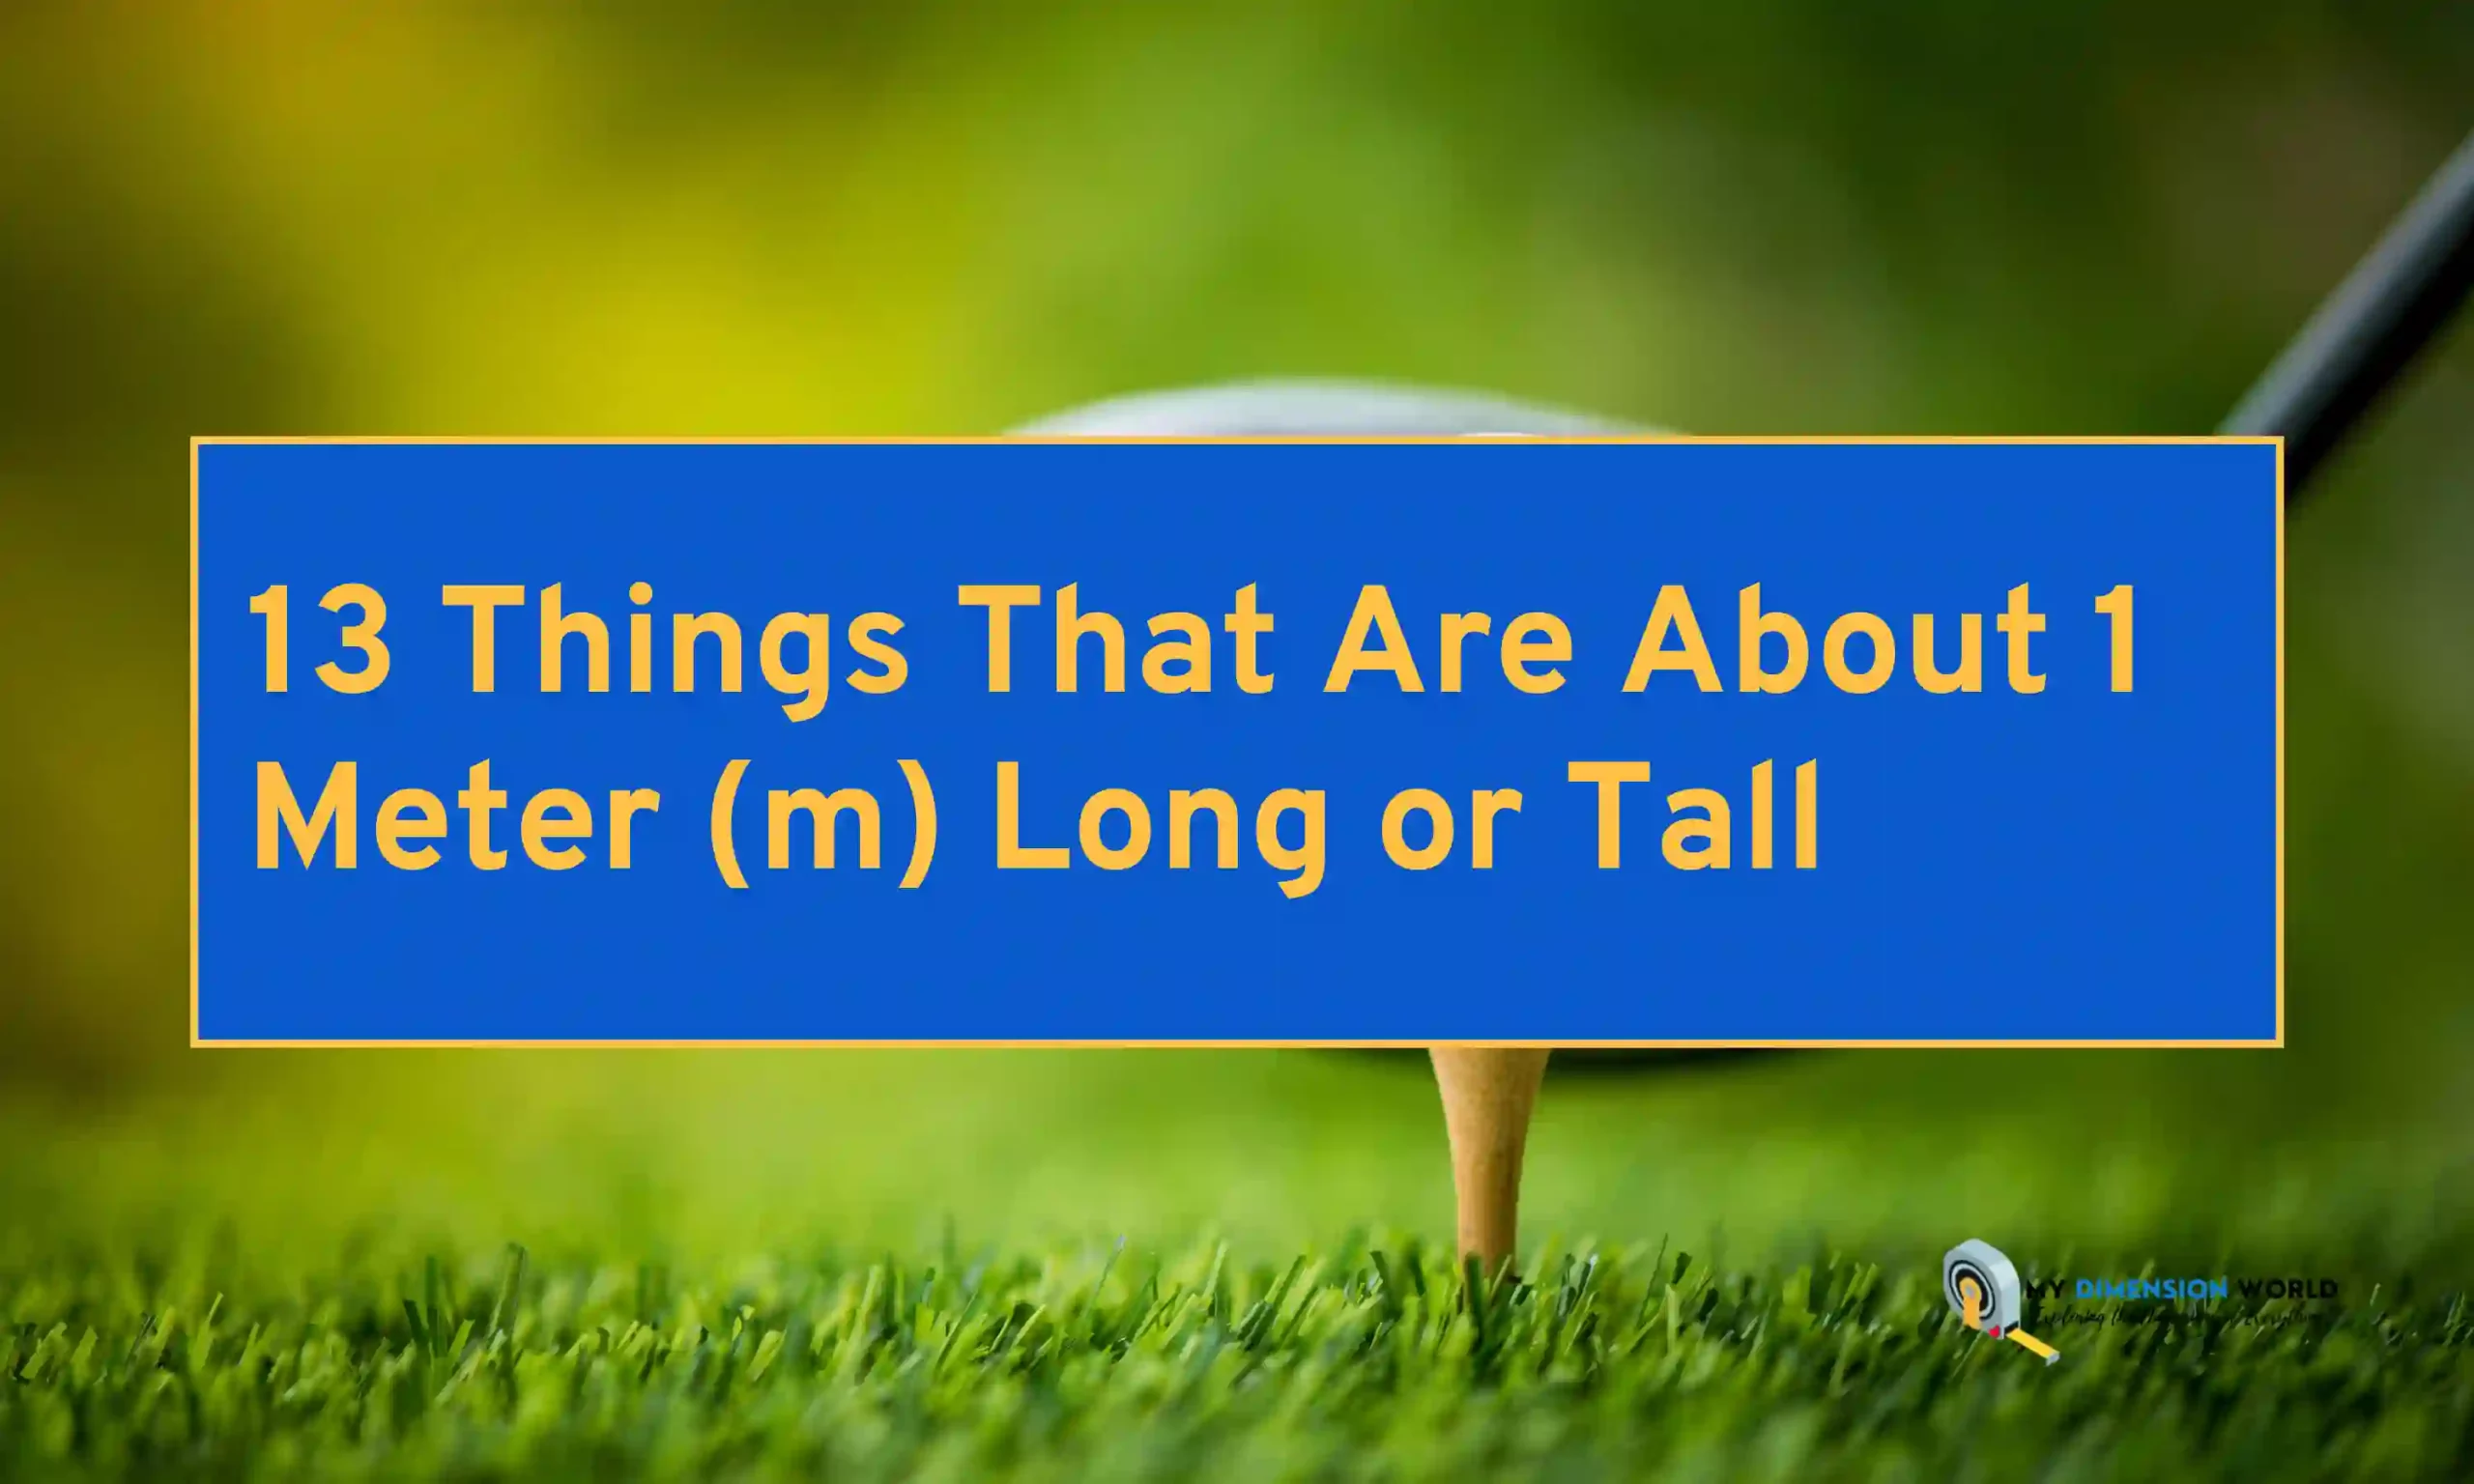 13 Things That Are About 1 Meter (m) Long or Tall